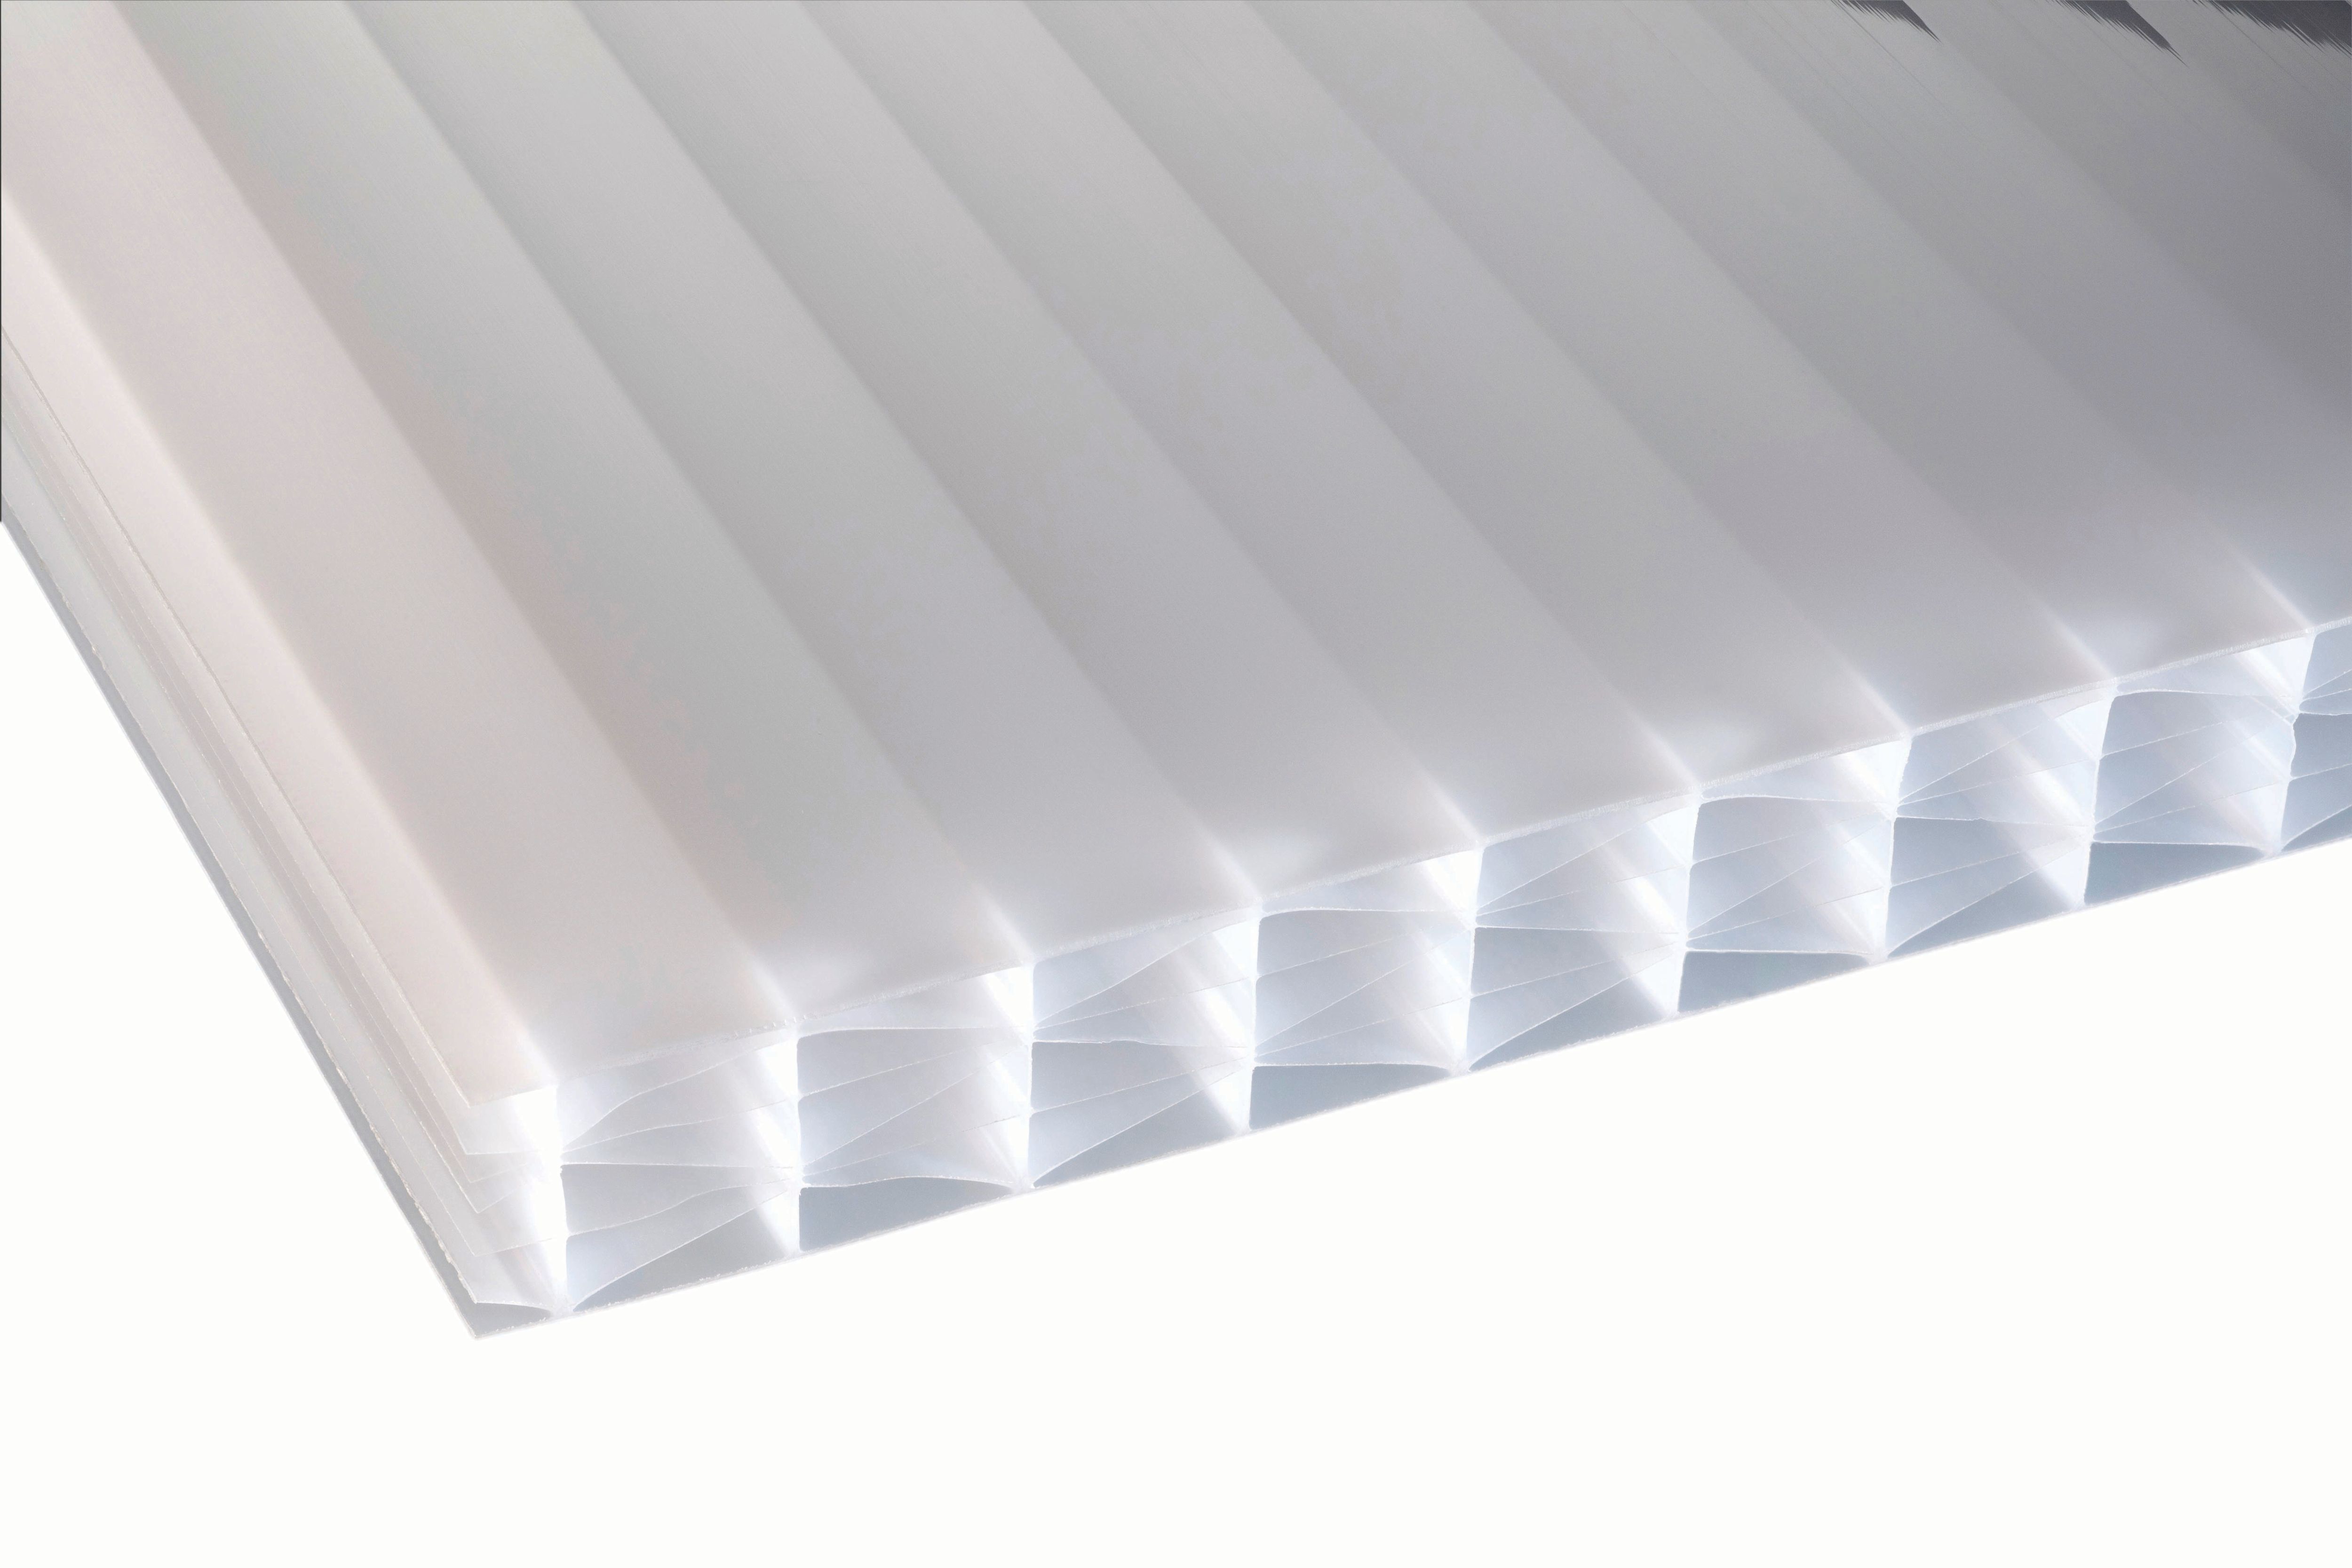 Image of 25mm Opal Multiwall Polycarbonate Sheet - 3000 x 1600mm